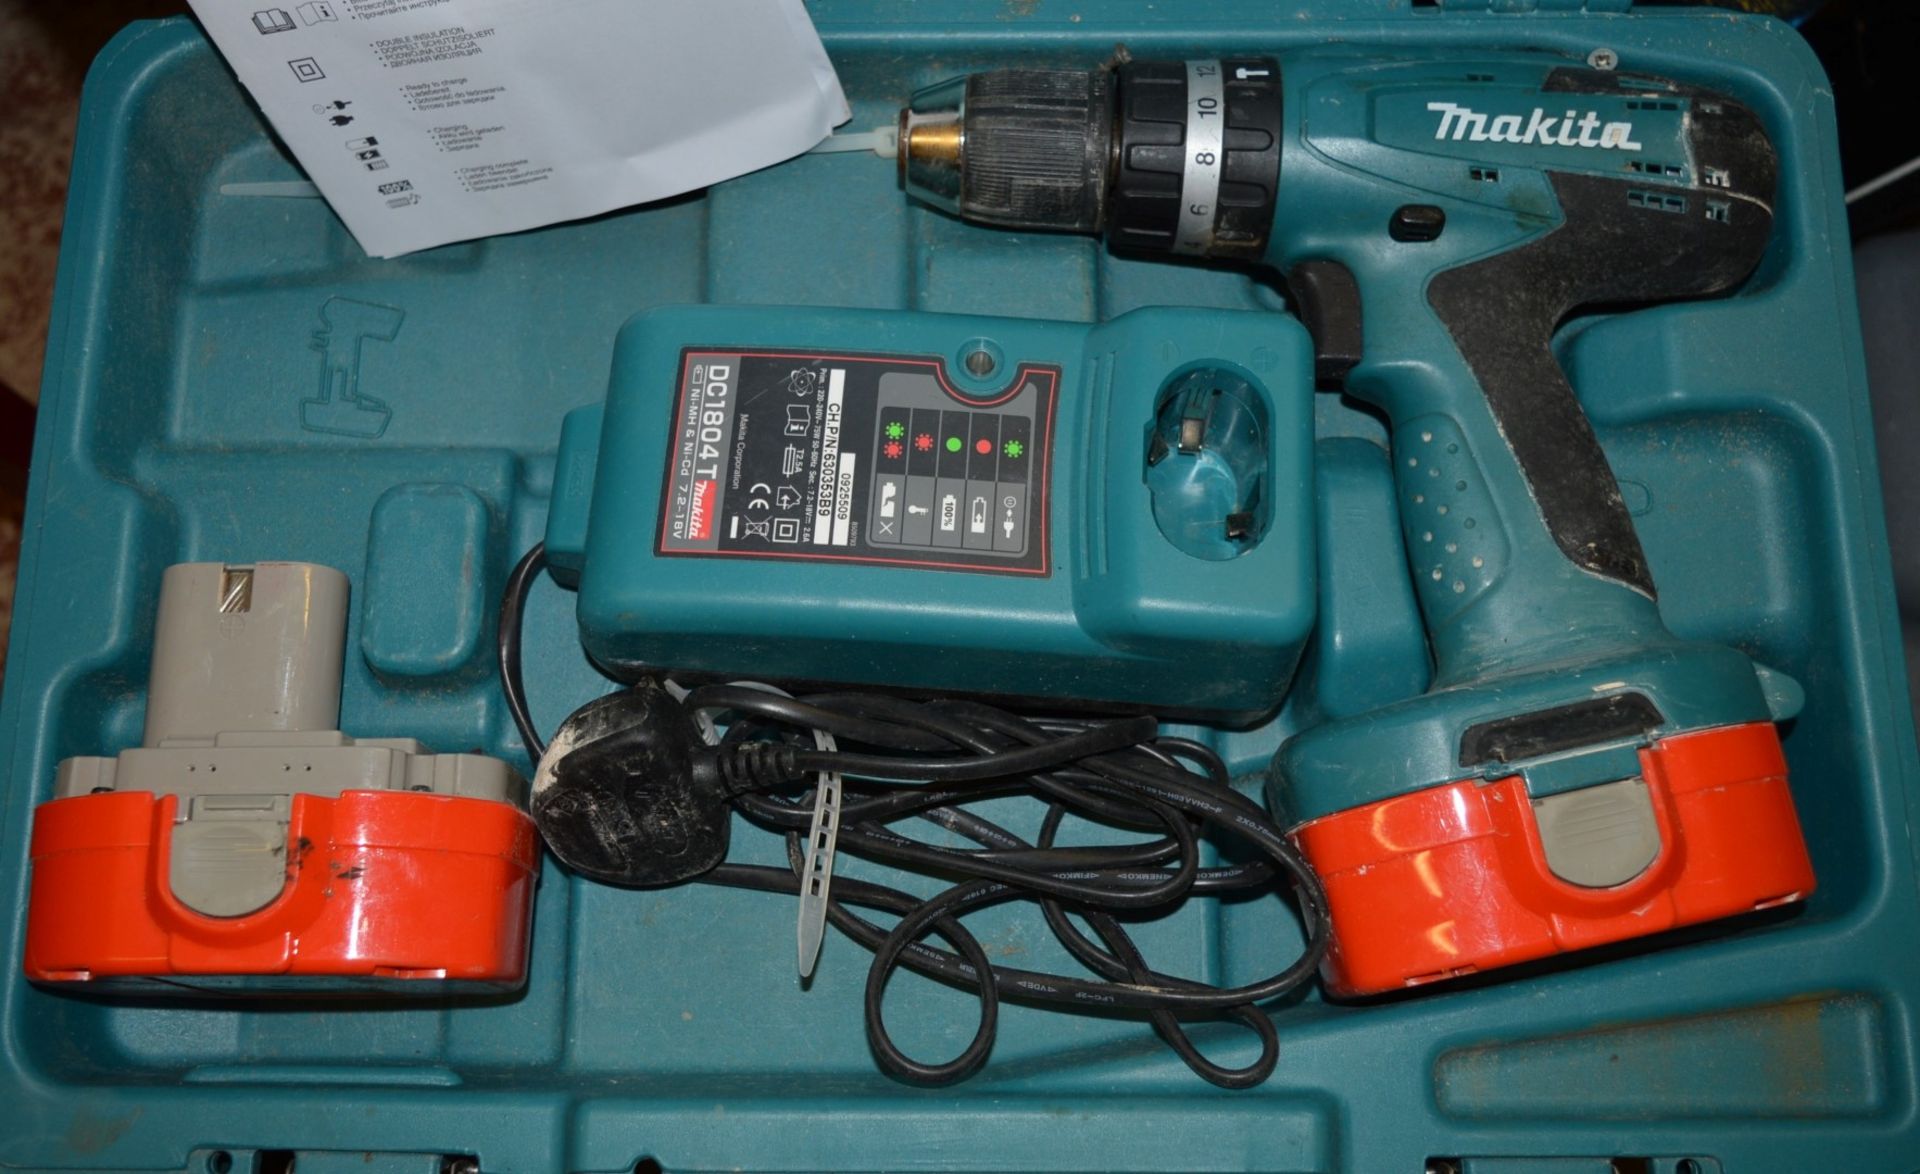 1 x Makita Cordless Hammer Drill - Model 8391D - Includes Case, Charger and Two Batteries - Ref: